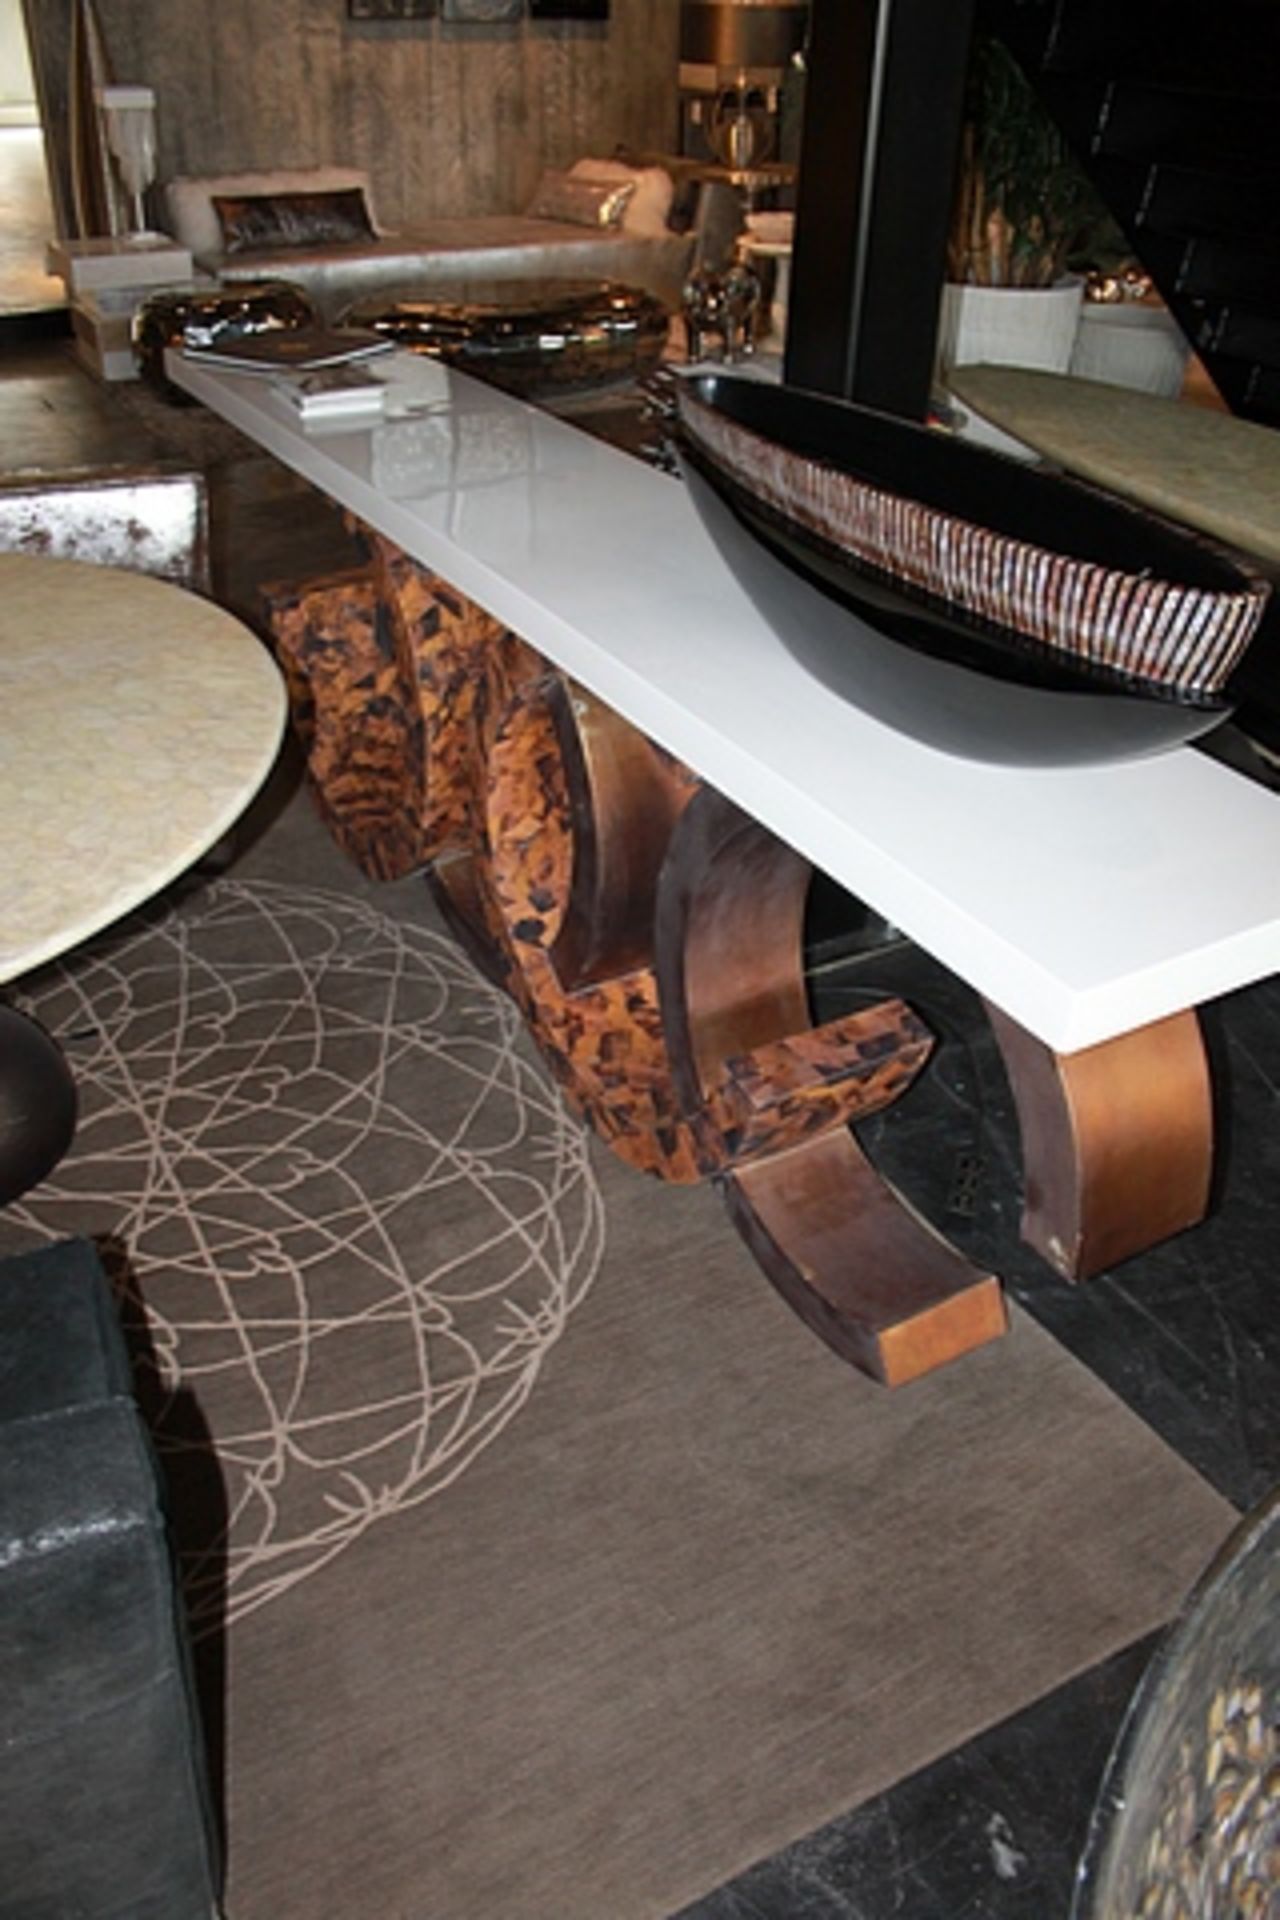 Console C large hall table hand-shaped pen shells in natural shades of brown create a mosaic with